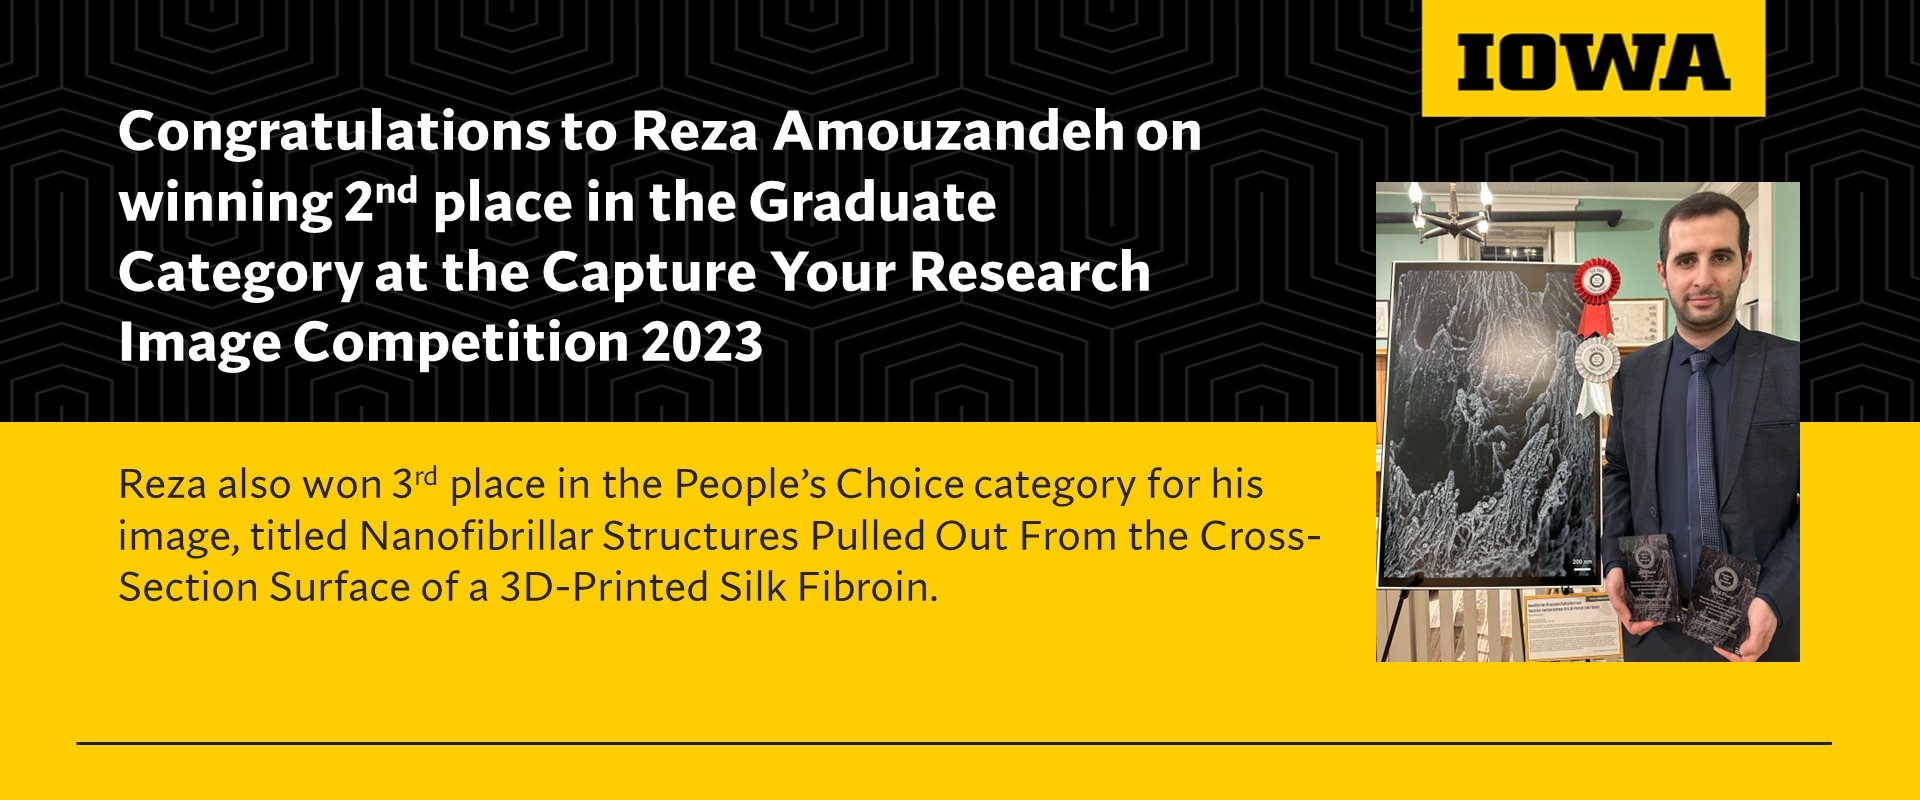 Image of Reza Amouzandeh, who won 2nd place in the Graduate Category at the Capture Your Research 2023 Image Competition